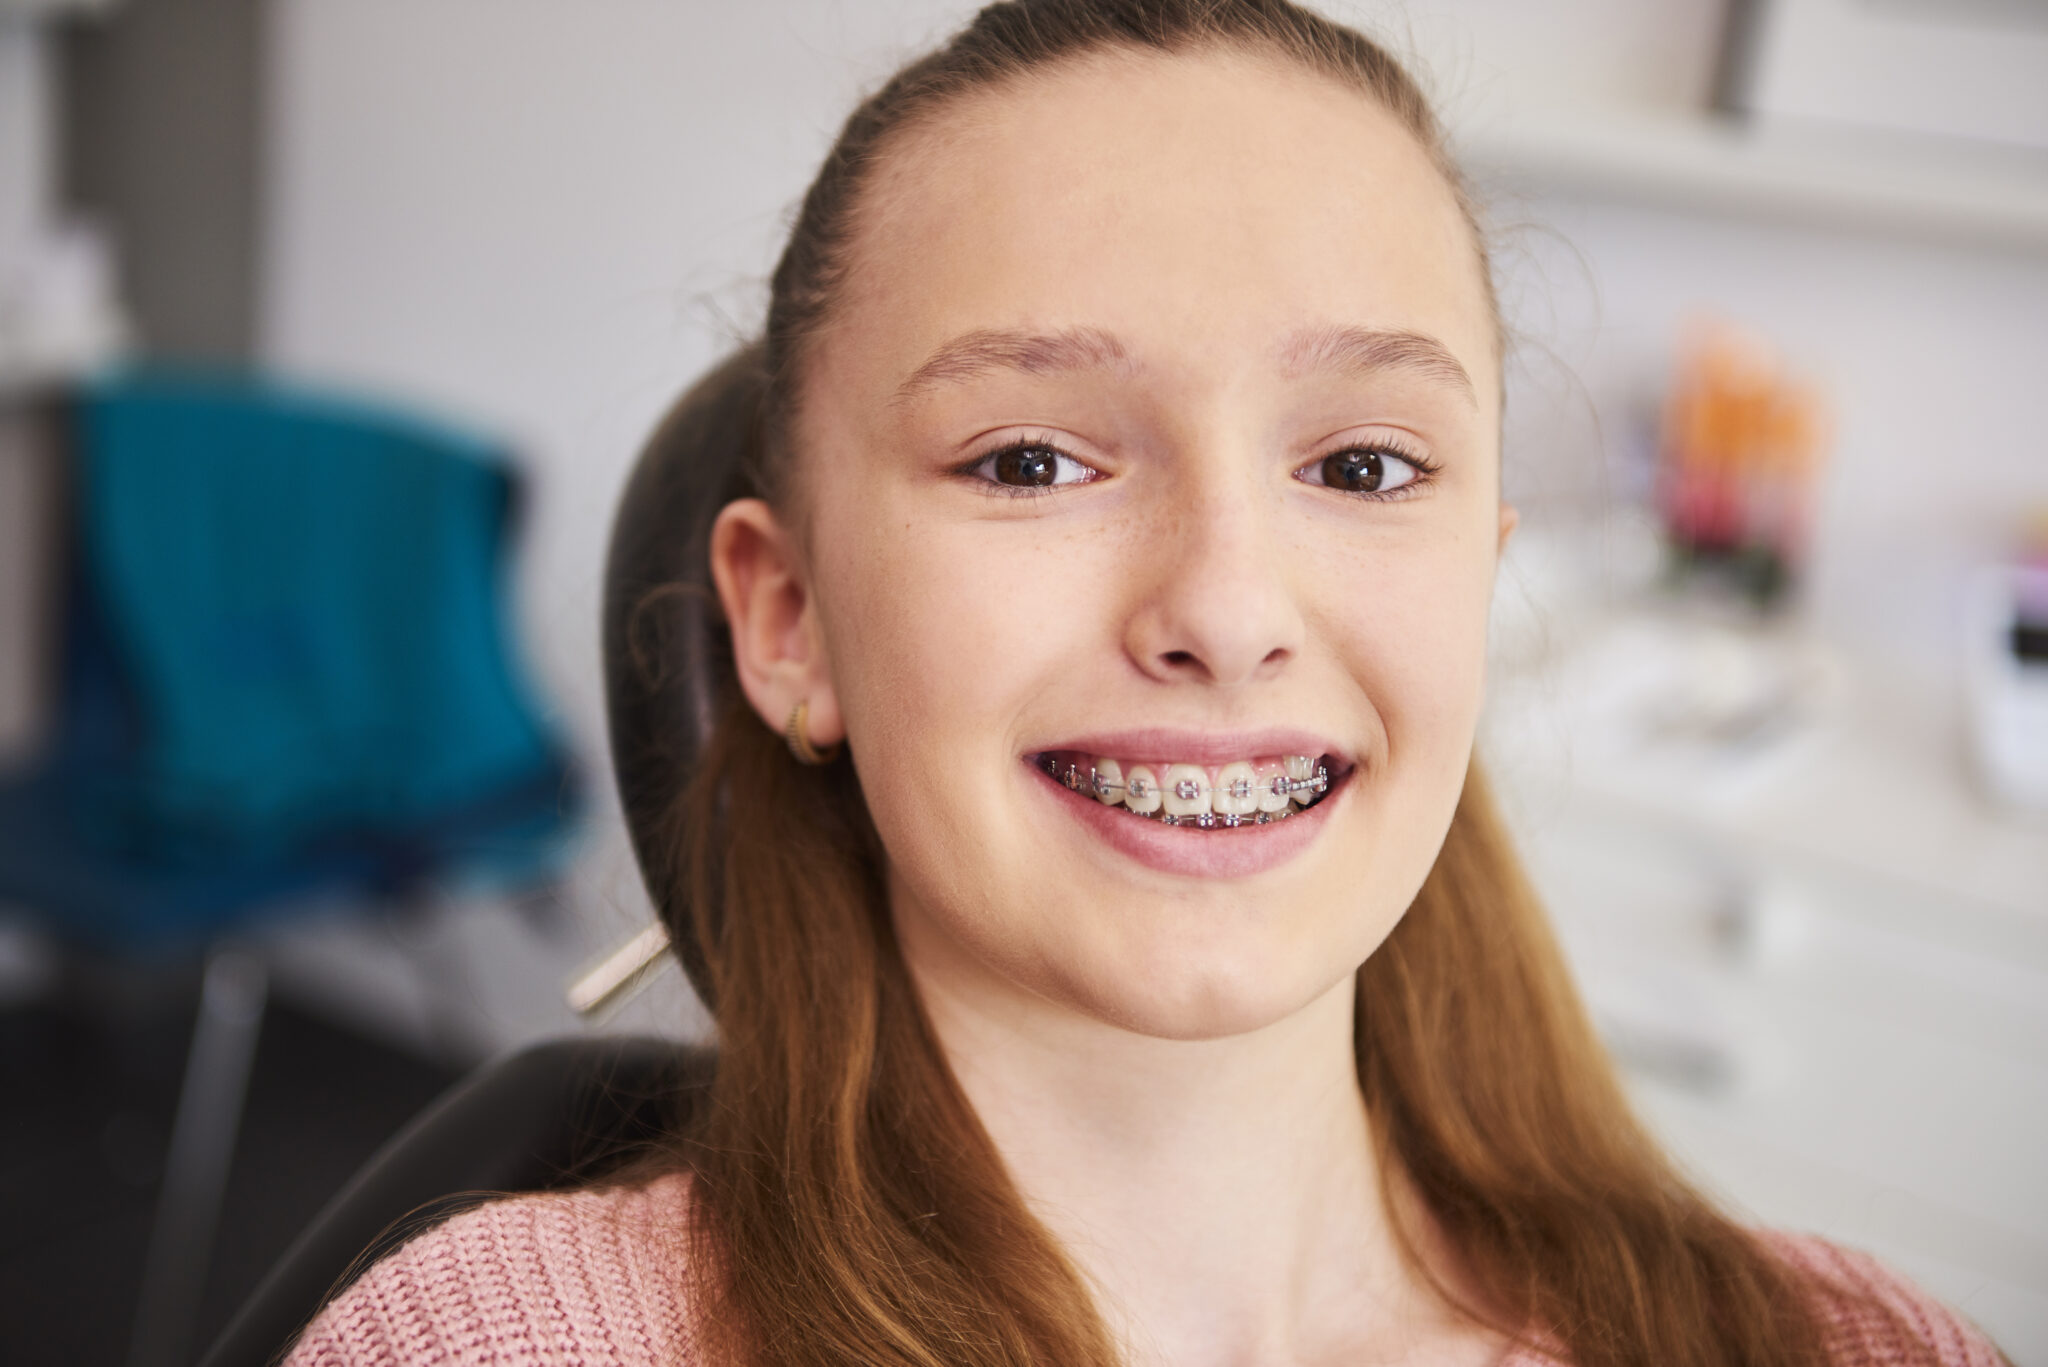 Ways In Which Children Can Maintain Teeth With Braces